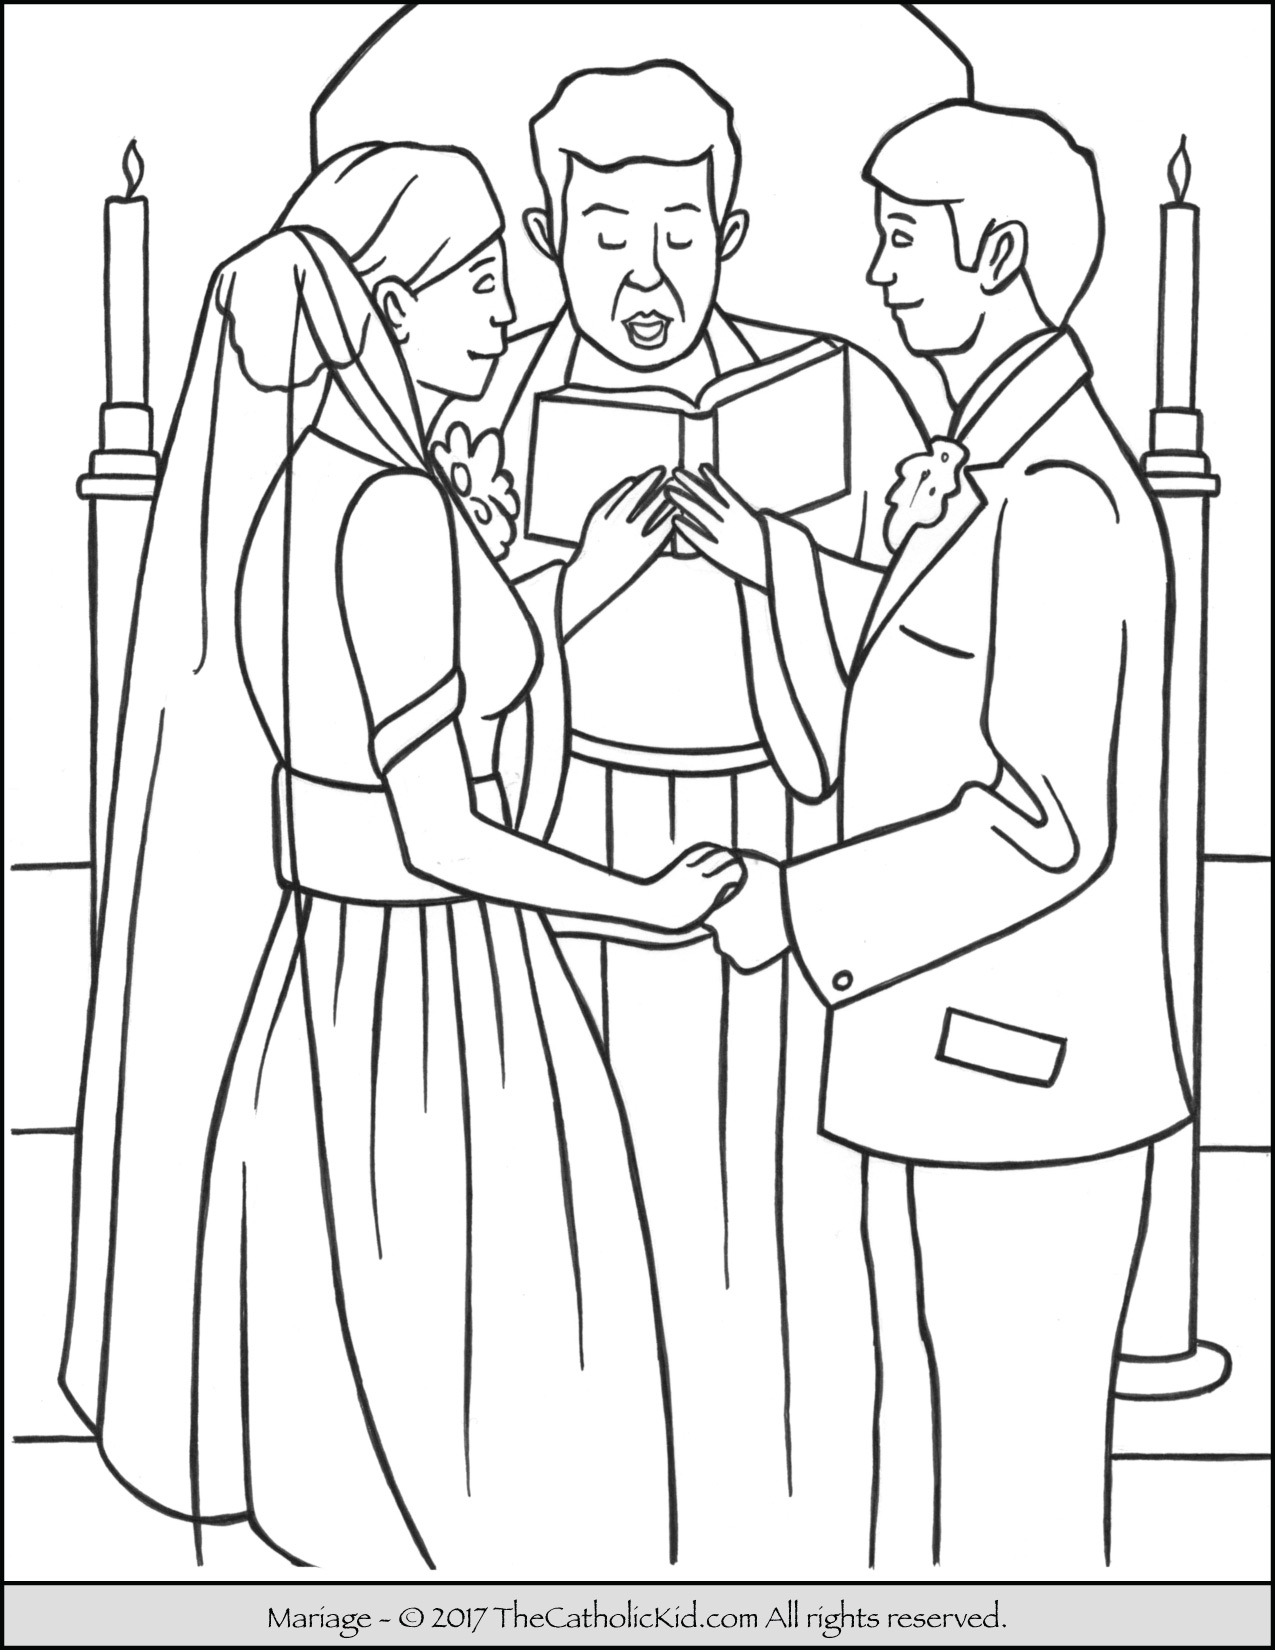 sacrament-of-marriage-coloring-page-coloring-home